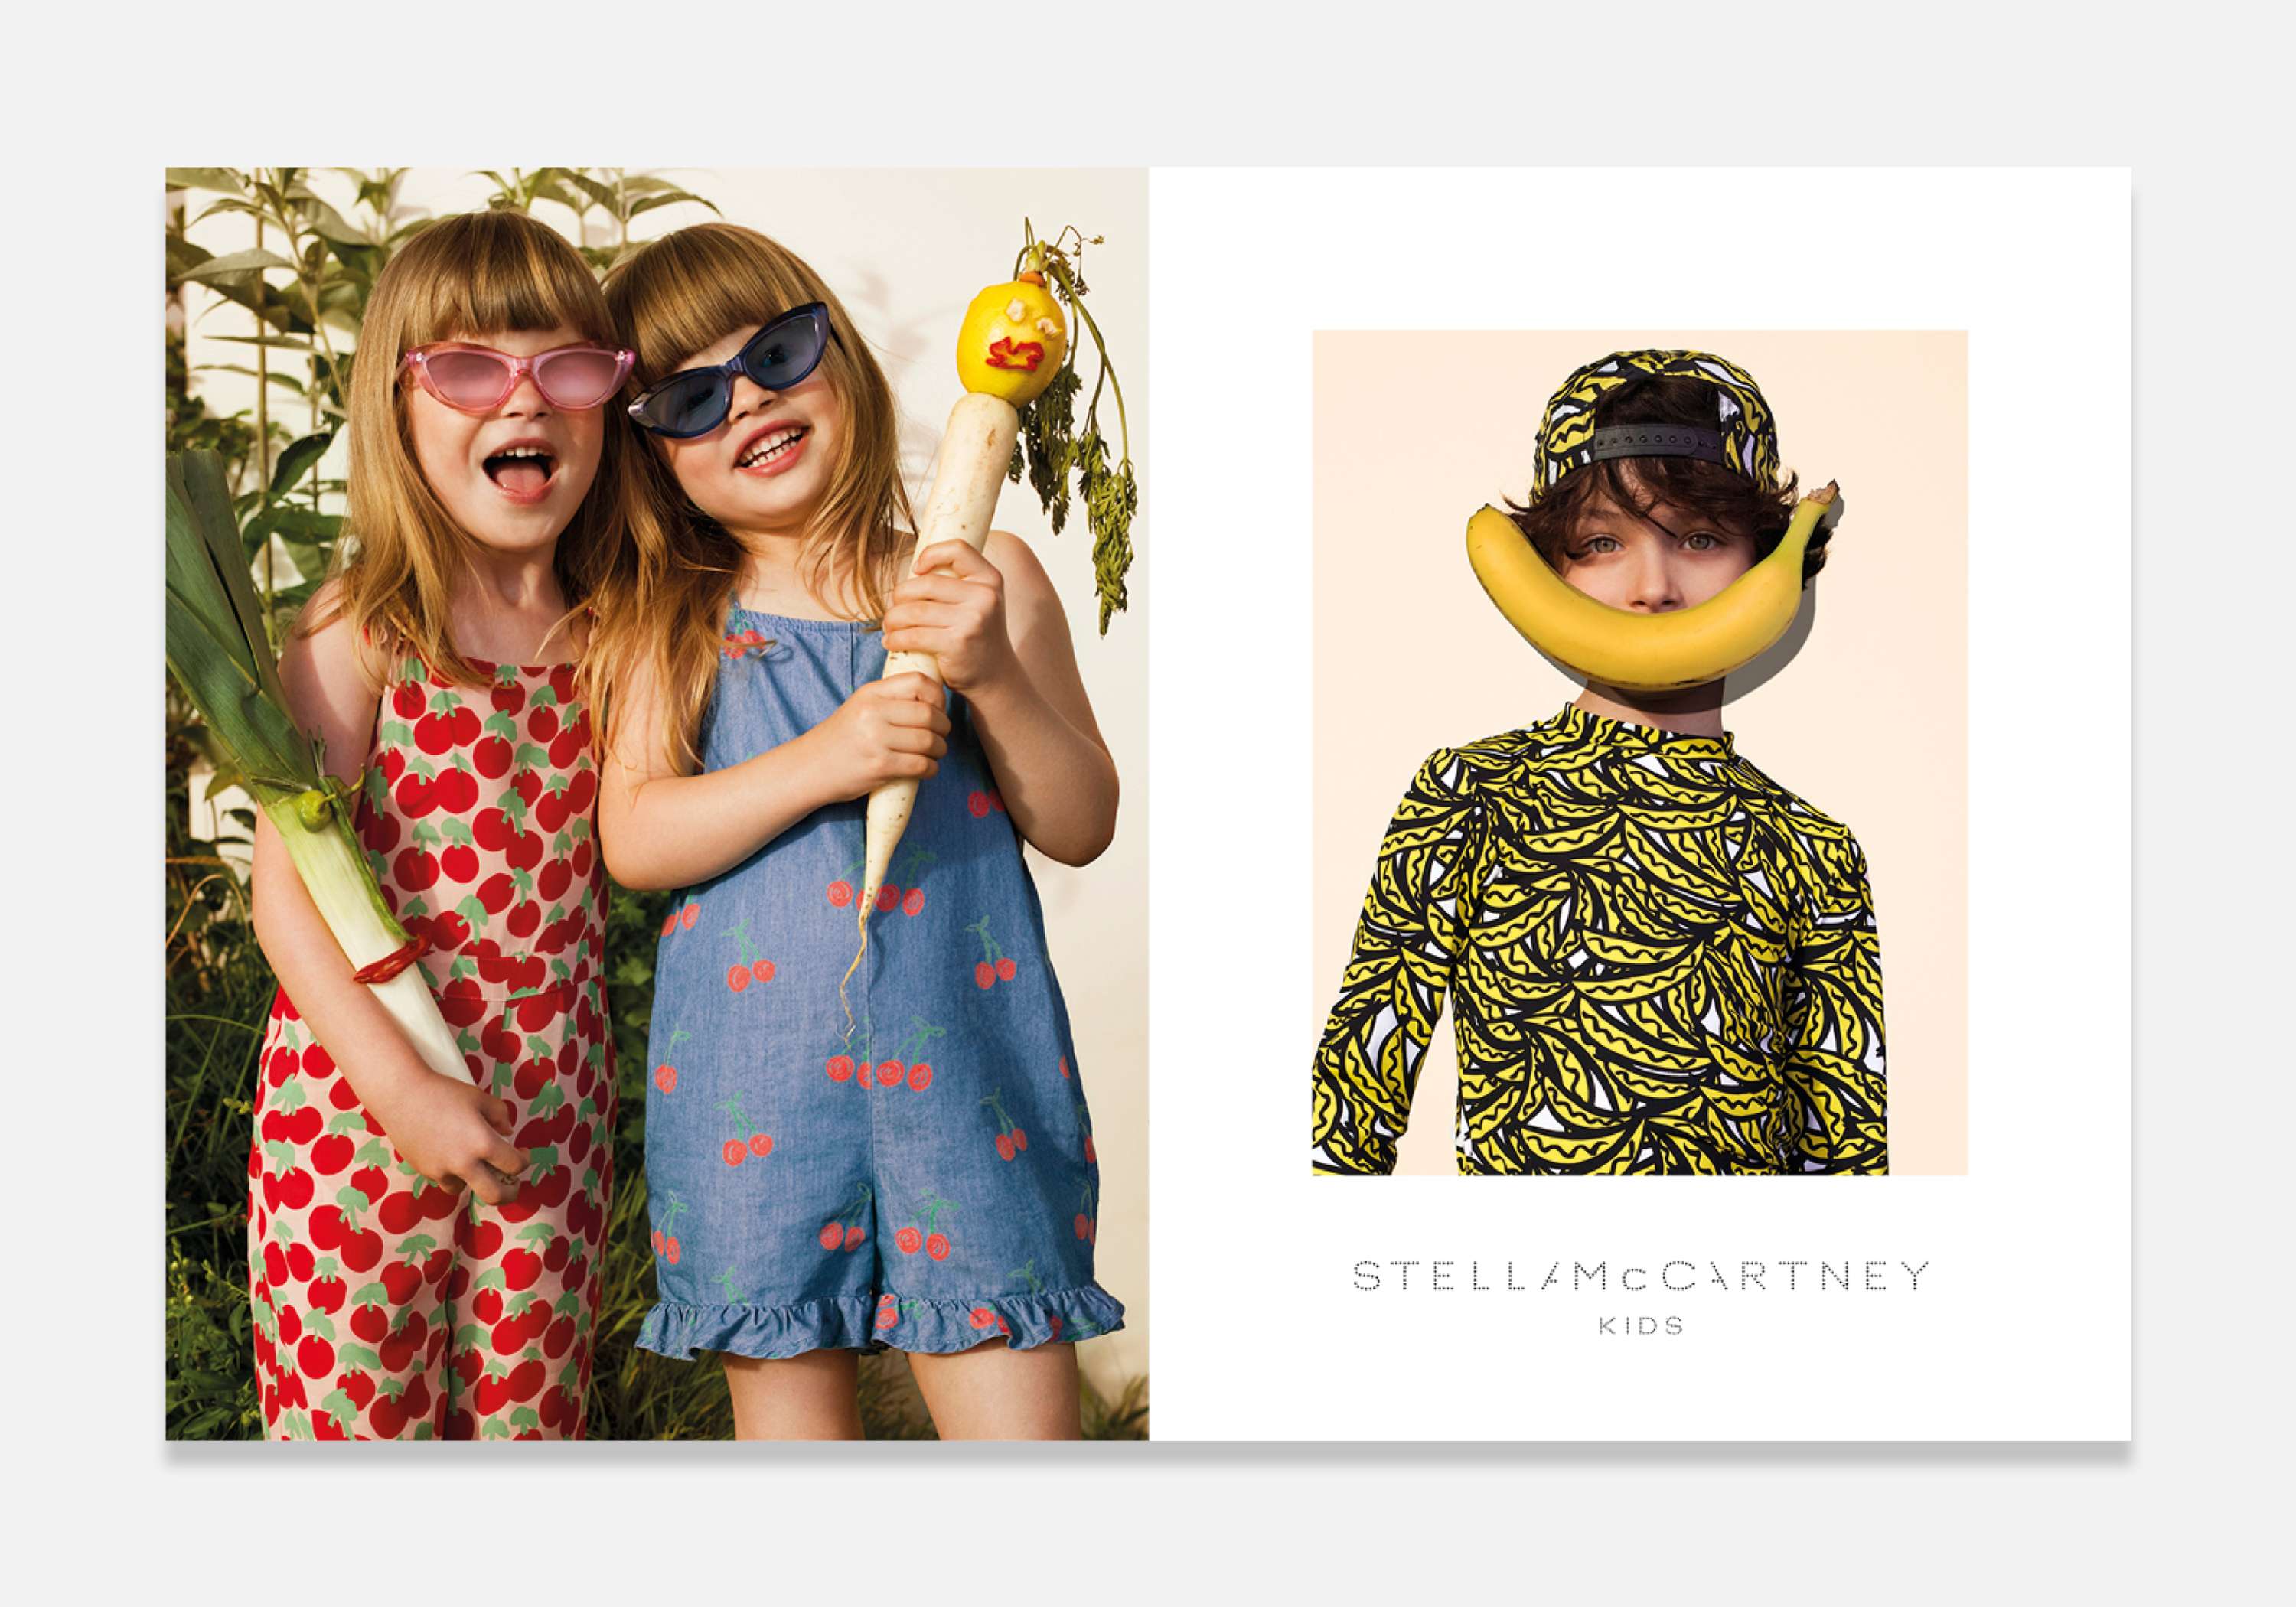 YOUTH MODE Soundtracks Stella McCartney's Sustainable AW19 Kids Campaign